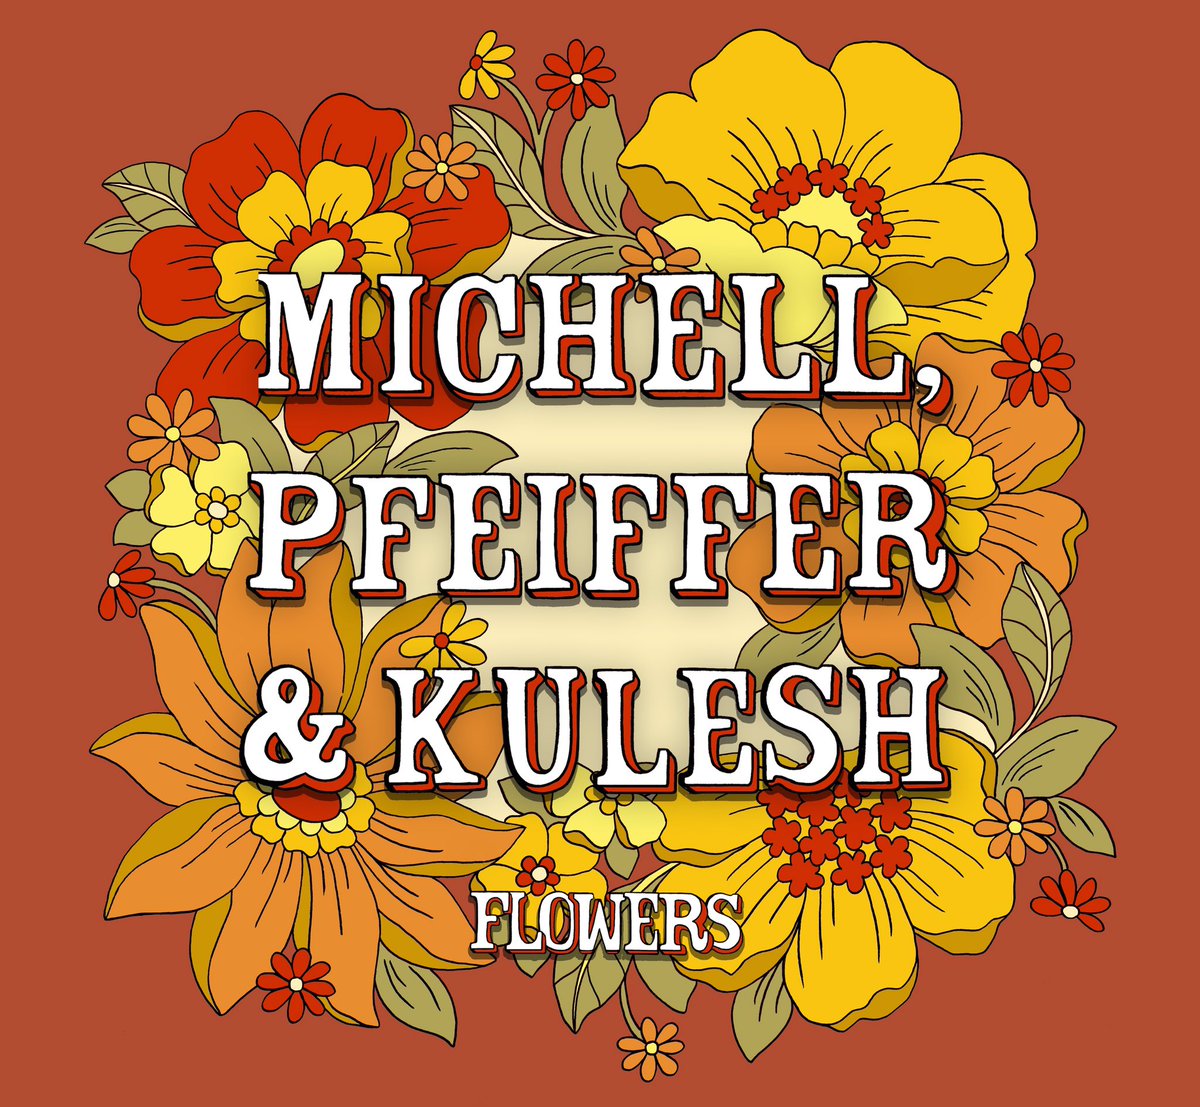 Today, on #BandcampFriday, treat yourselves to a pre-order of Flowers, the debut full-length album from Michell, Pfeiffer & Kulesh: michellpfeifferkulesh.bandcamp.com/album/flowers 🌹🌼🌺 We've had no grants, sponsorship or crowdfunder - your support means the 🌍! Thank you! @odettemichell @paulwalker239